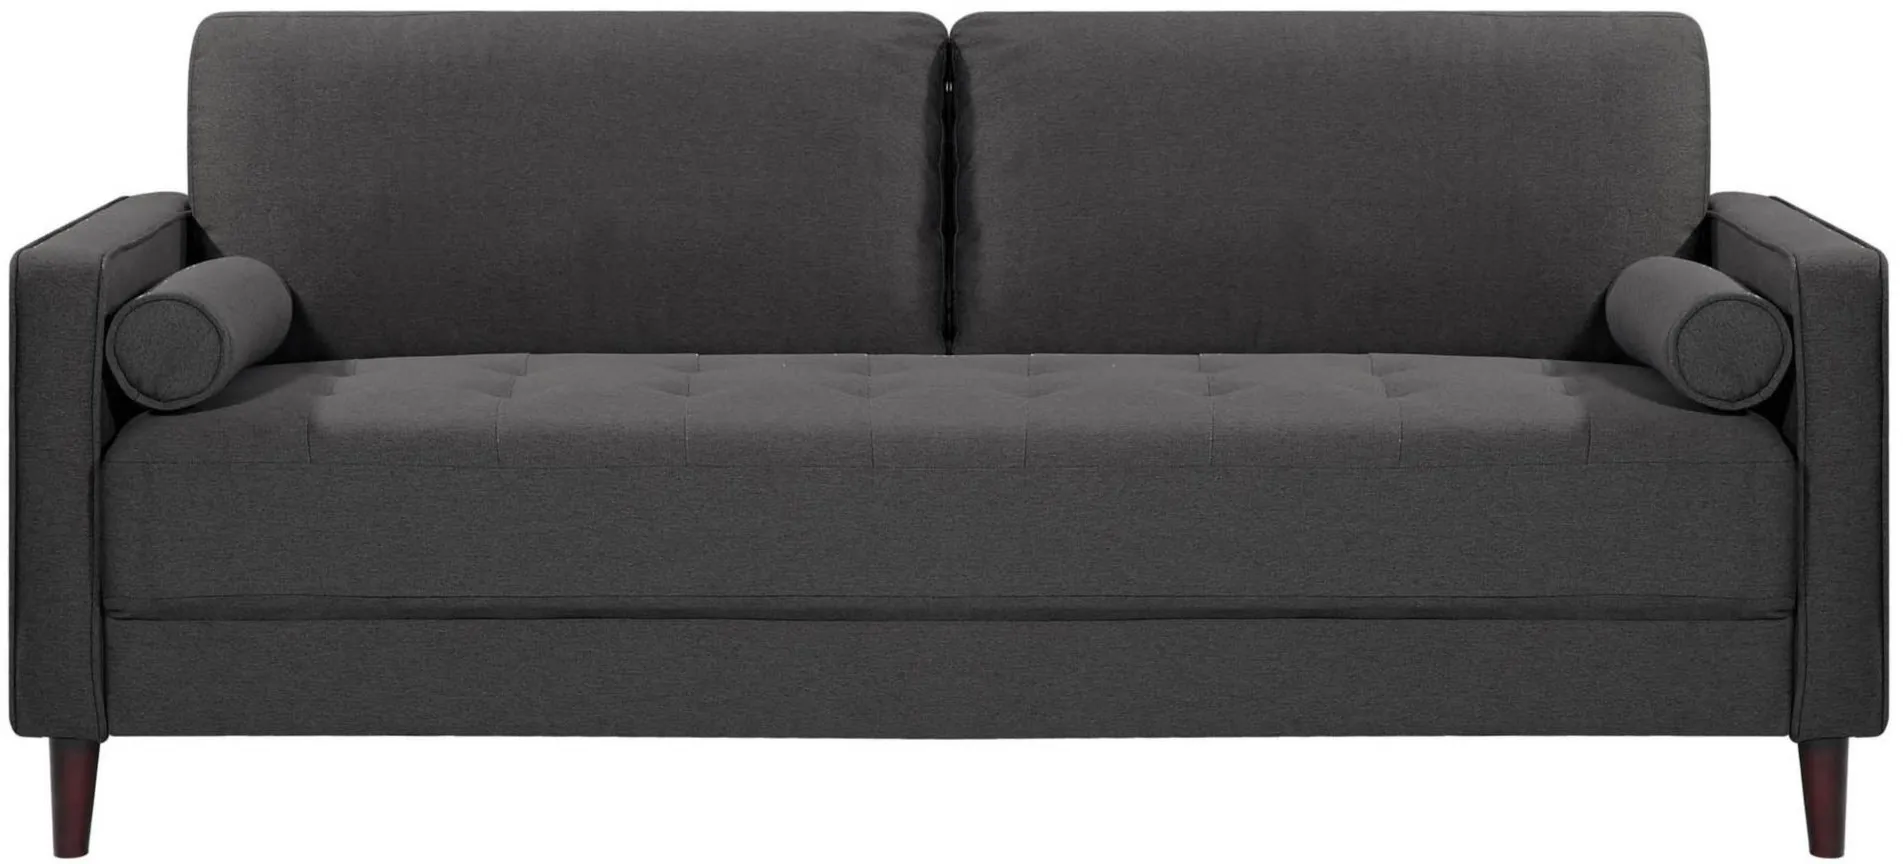 Forrester Sofa in Heather Gray by Lifestyle Solutions